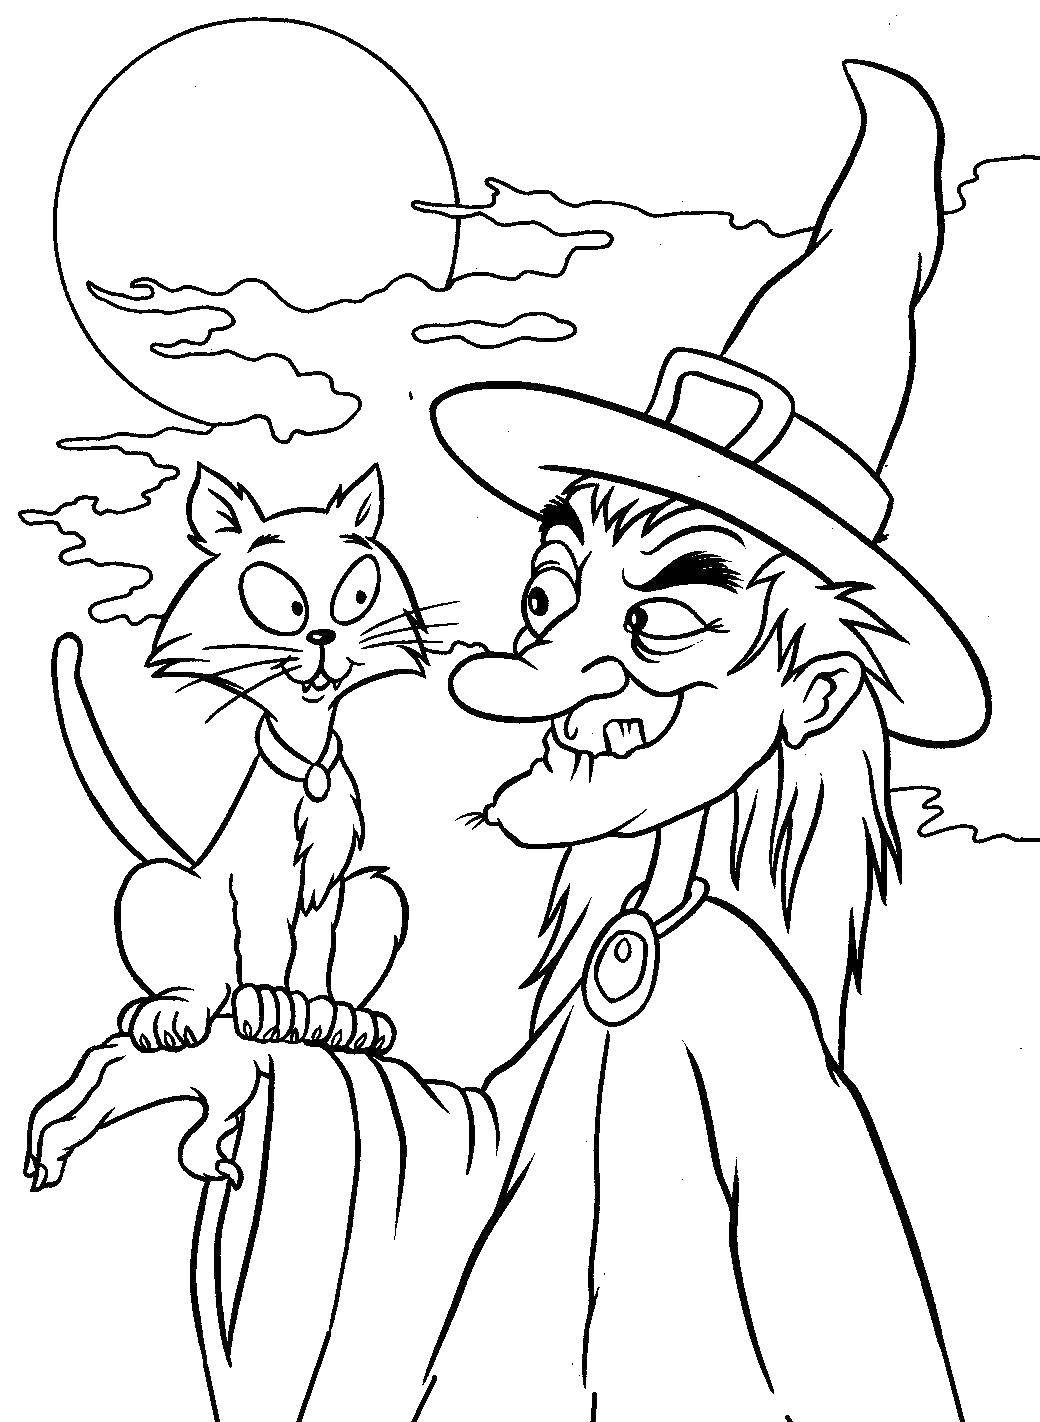 Coloring Witch with cat. Category witch. Tags:  that old woman, witch, cat.